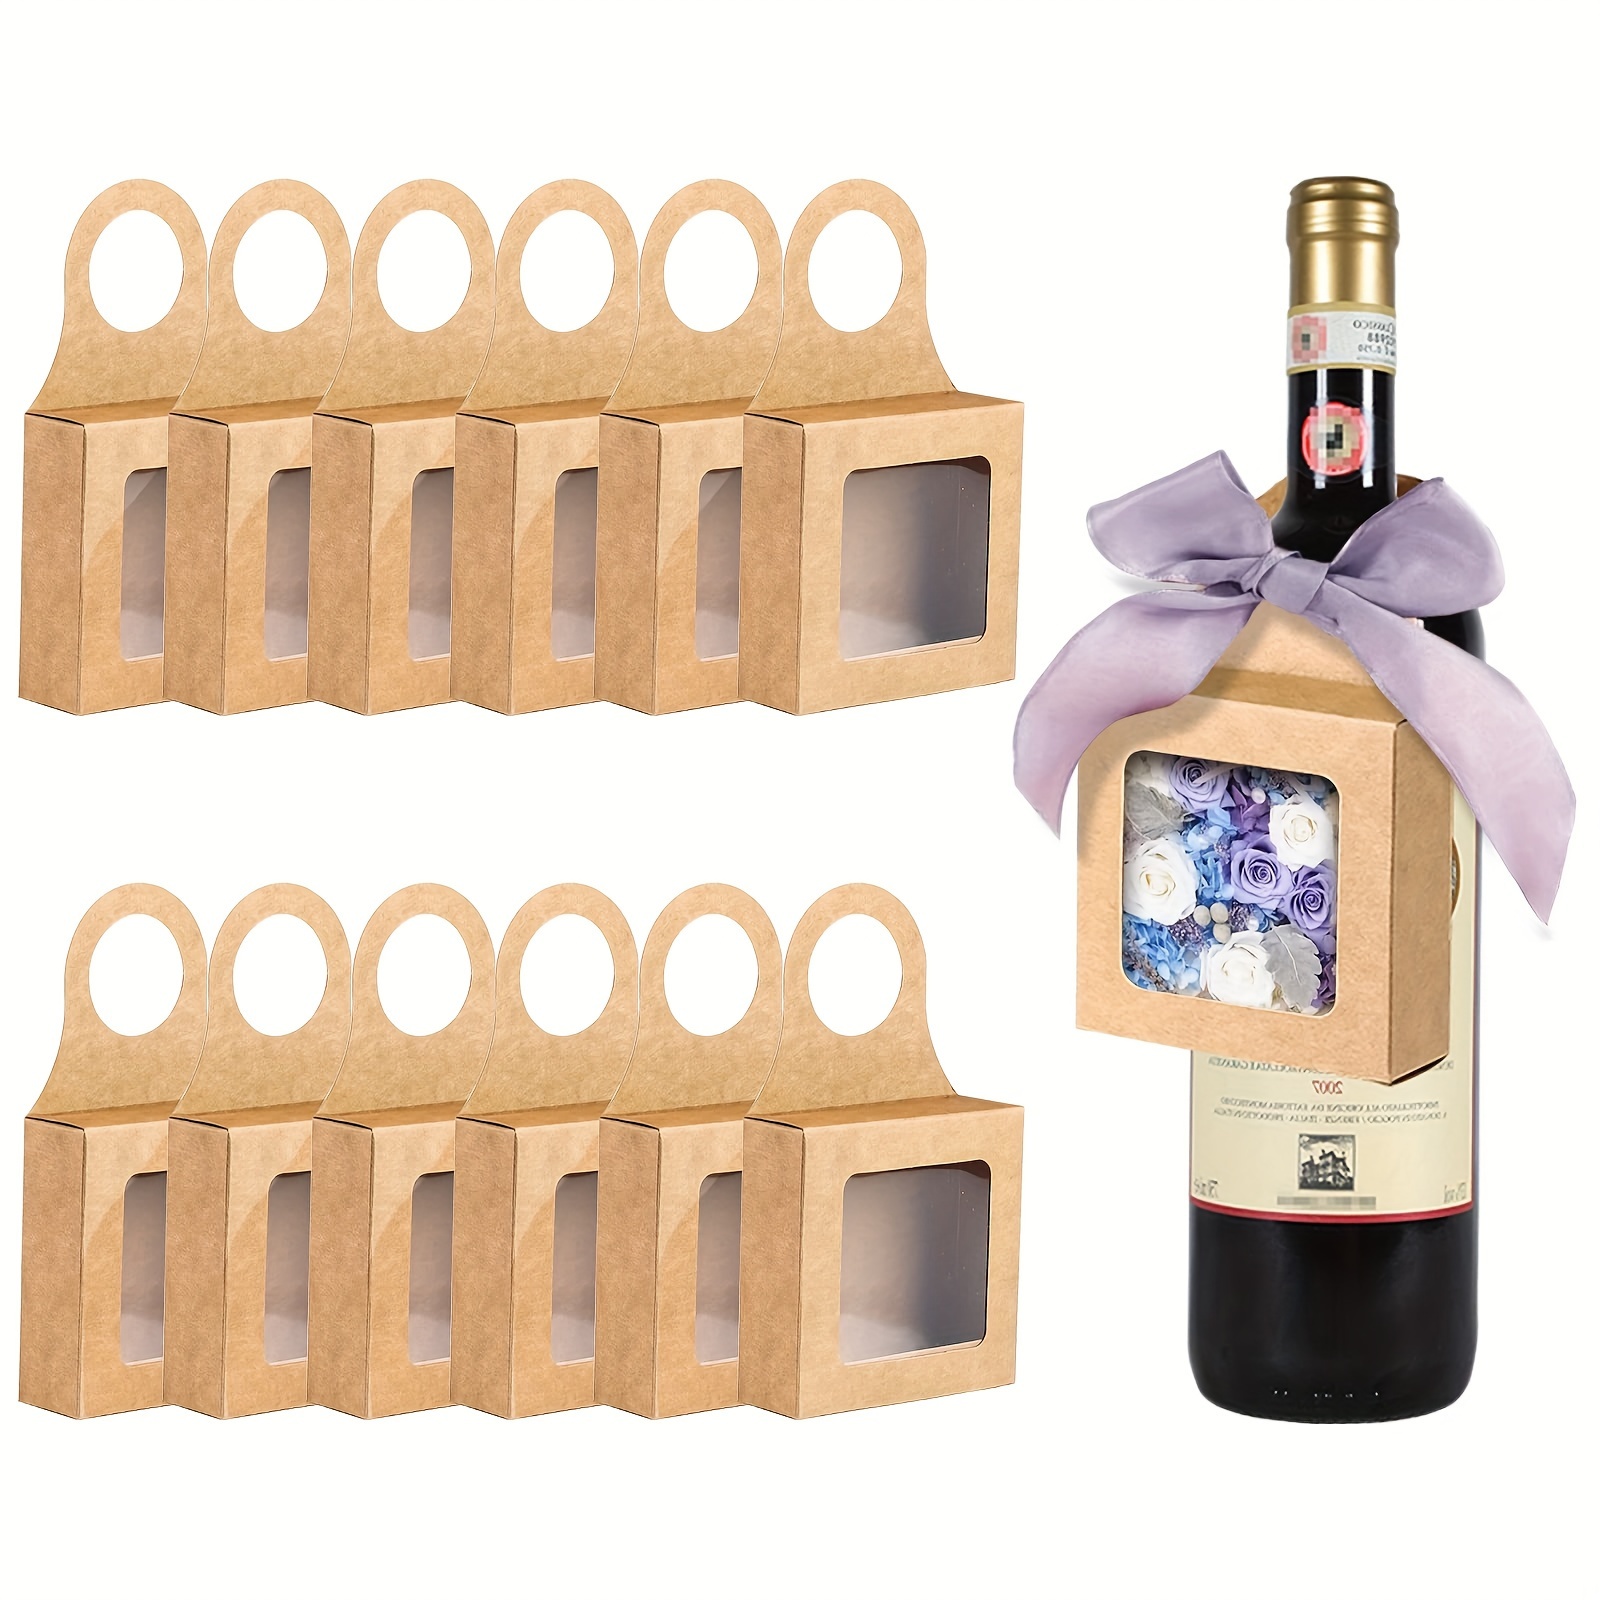 1pc Wine Glasses Storage Container With Dividers Box For Glassware